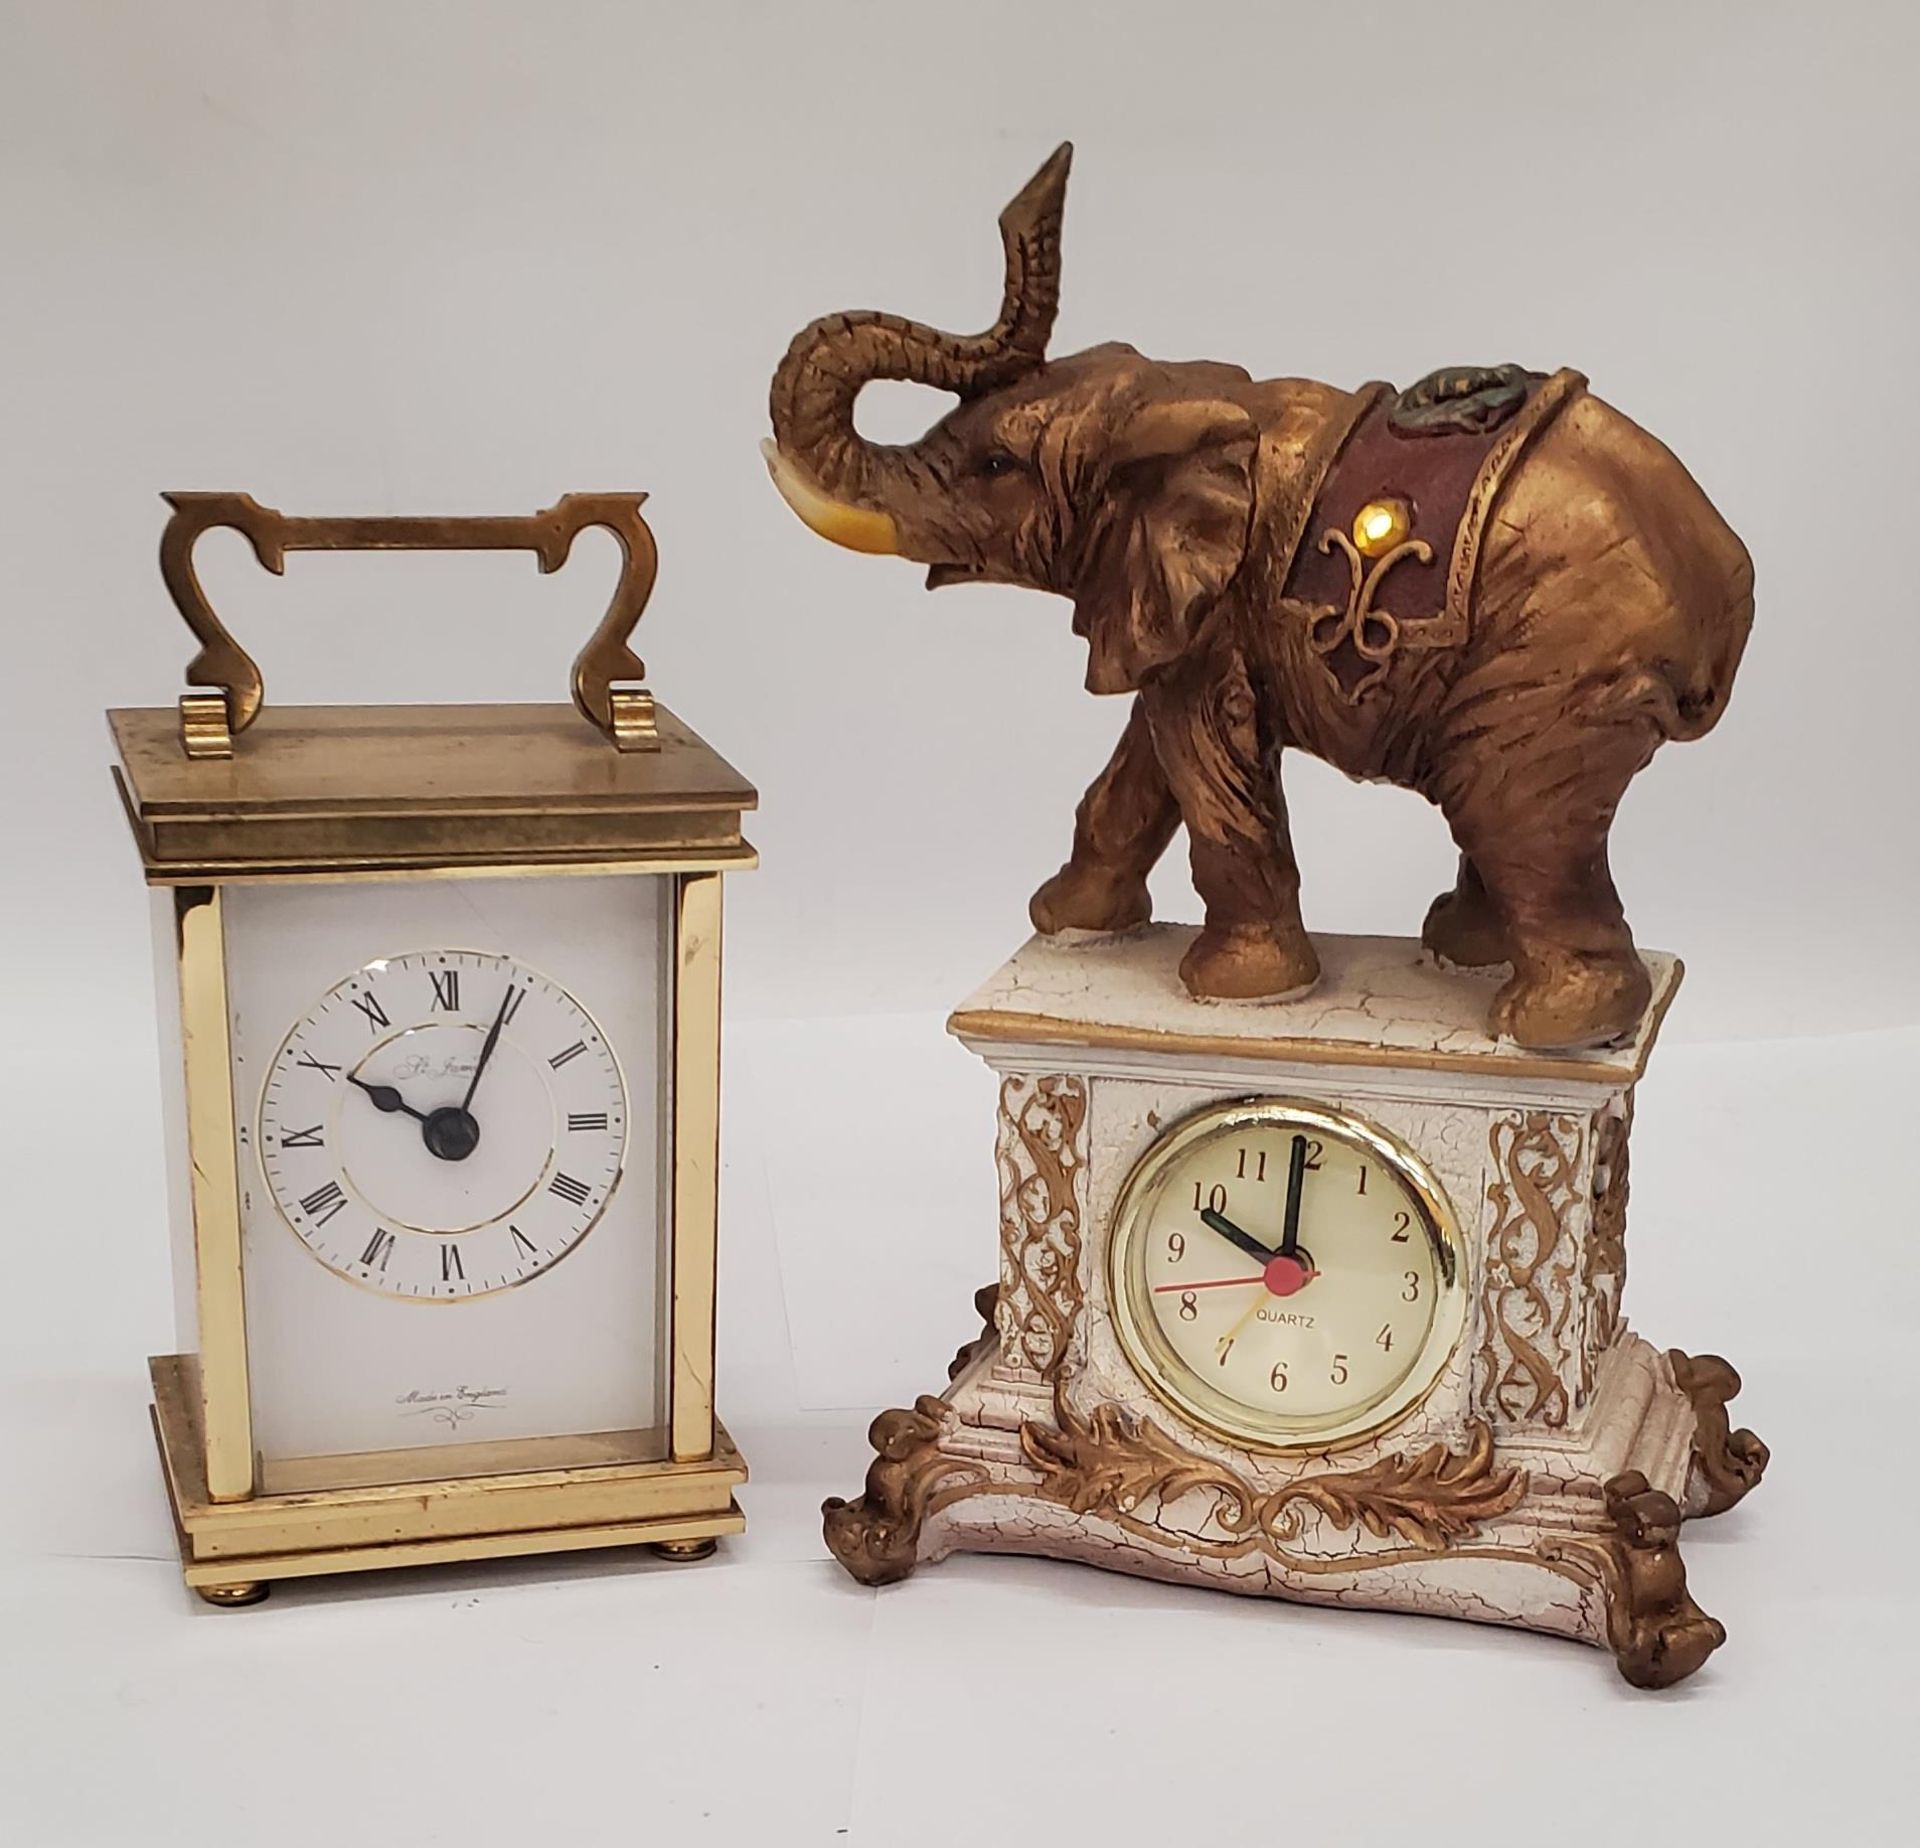 A VINTAGE ST. JAMES BRASS CARRIAGE CLOCK PLUS A MANTLE CLOCK WITH AN ELEPHANT ON TOP